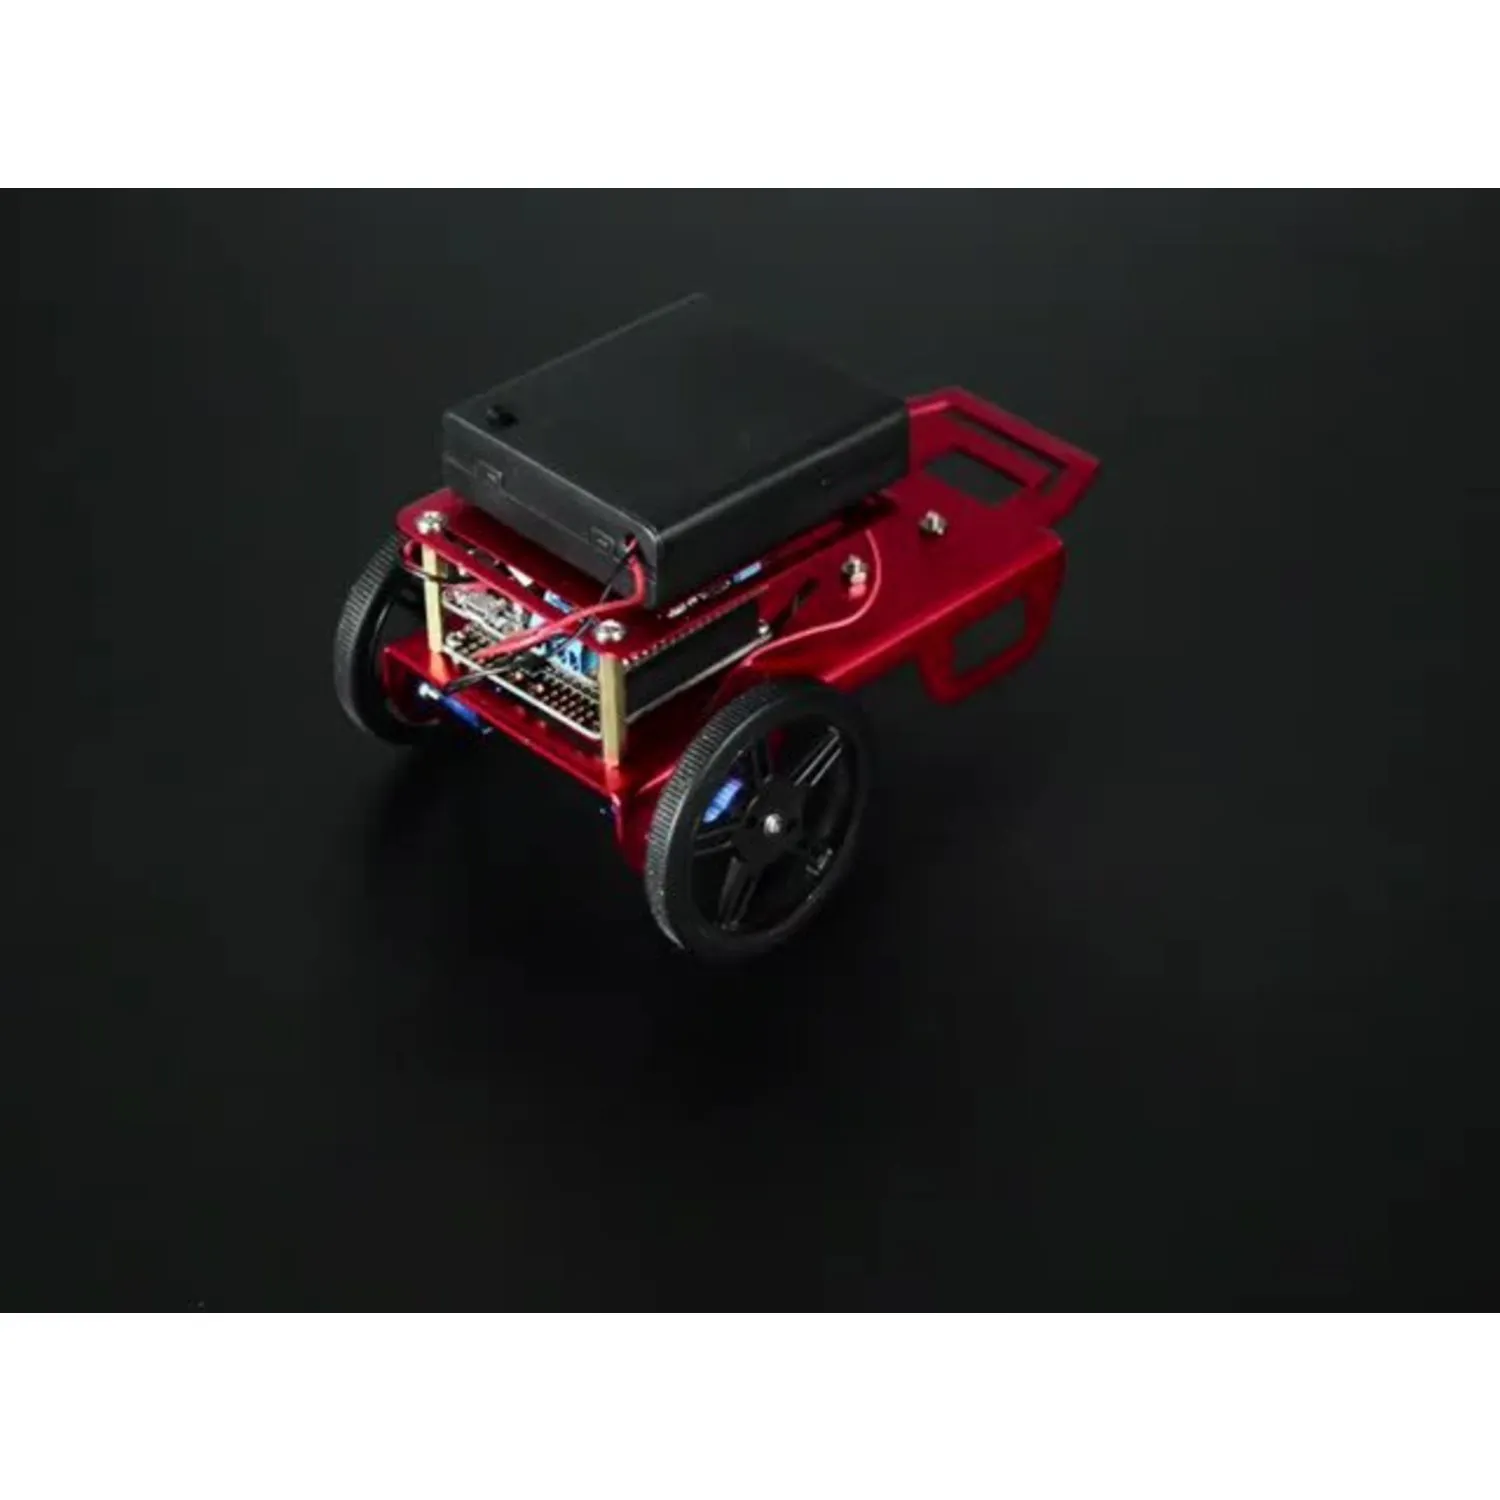 Photo of MyMiniRaceCar Project Pack - Featuring TE  Digikey